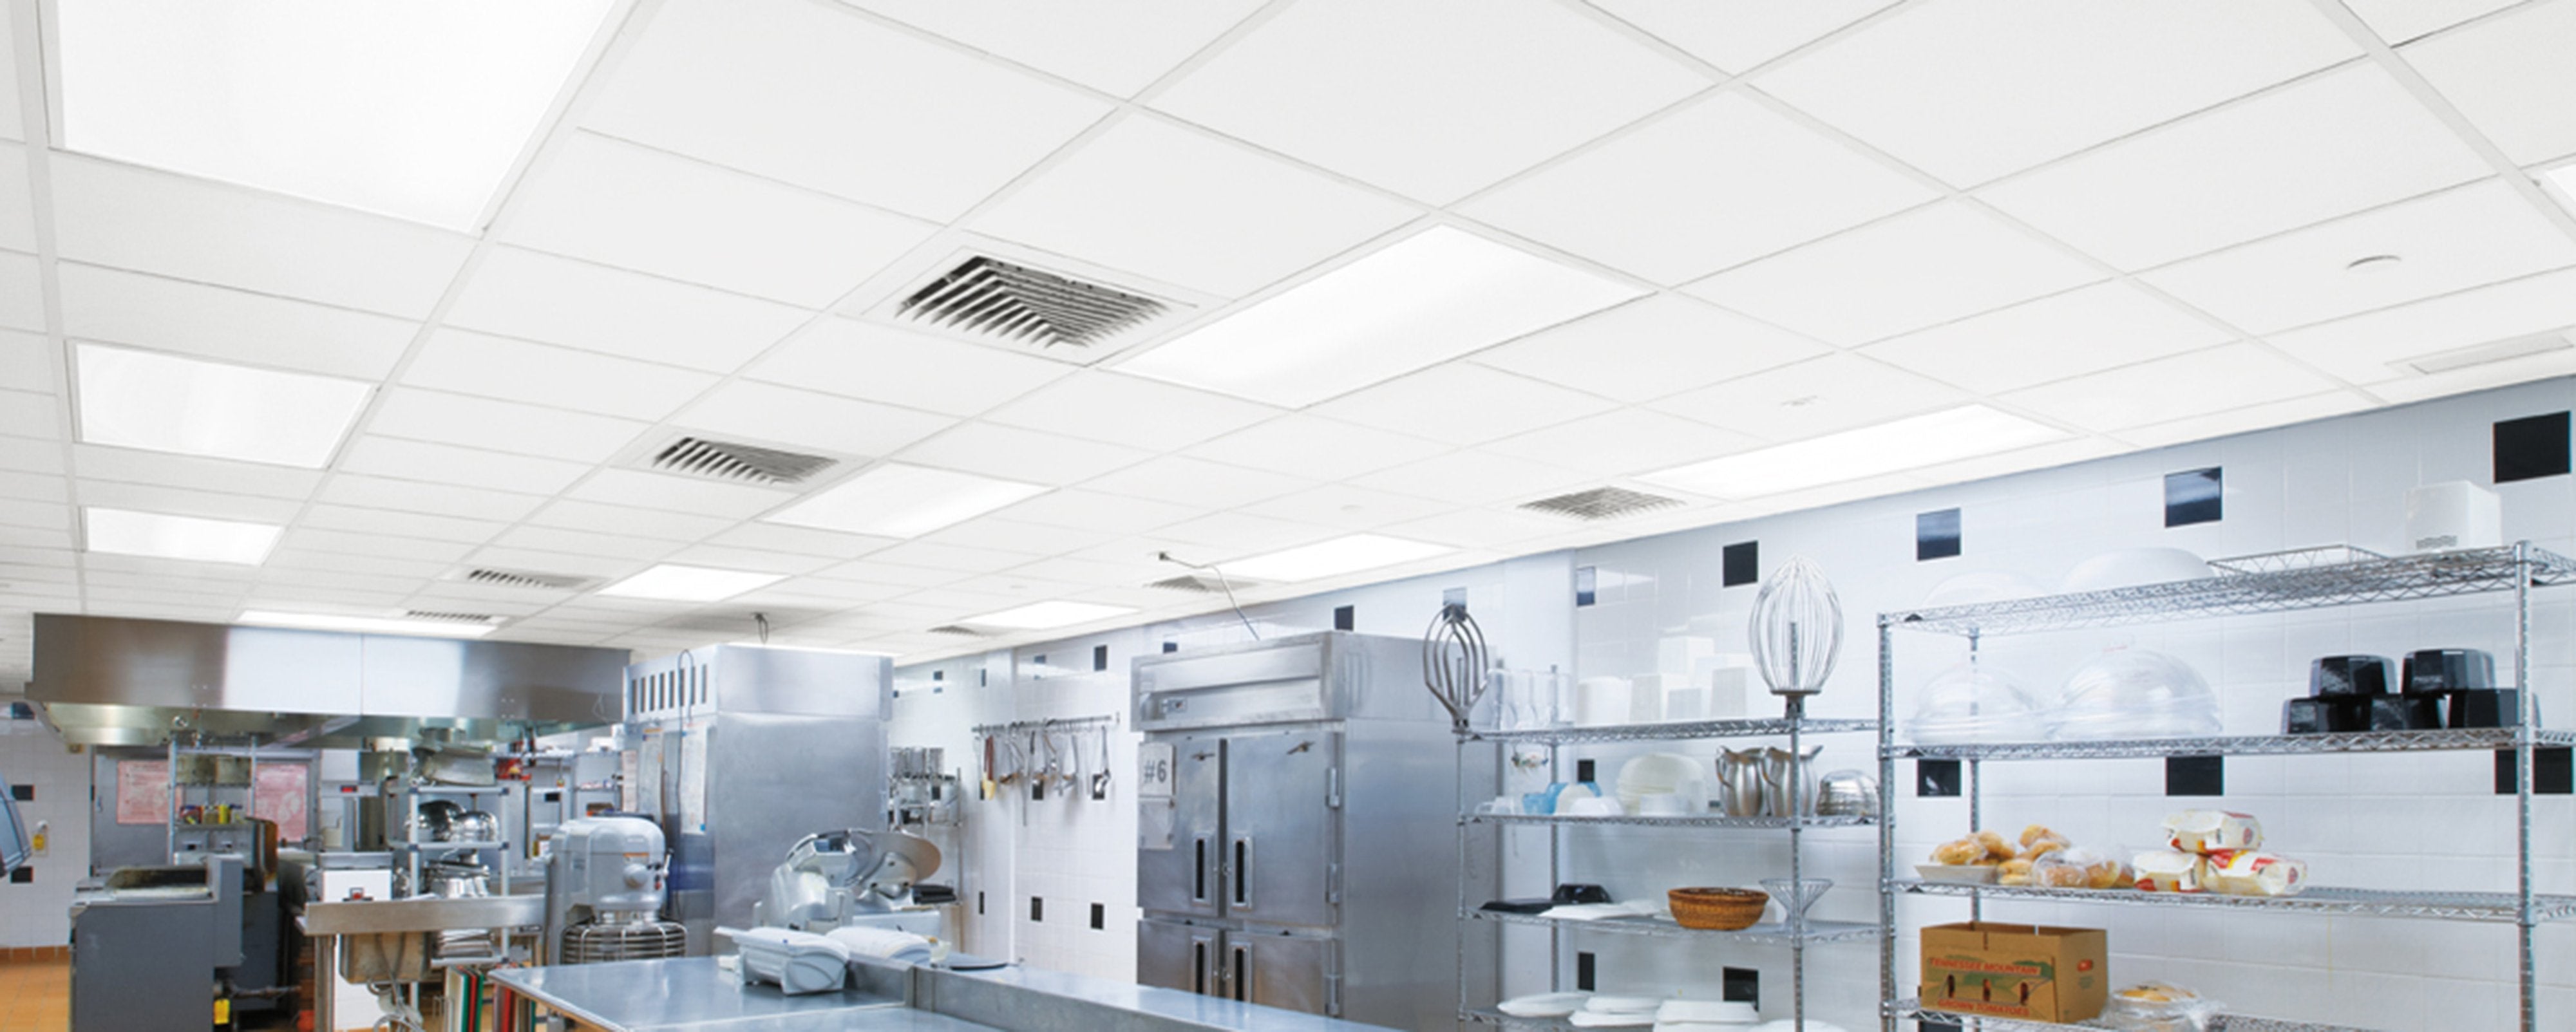 Commercial Kitchen Ceiling Tiles Buyers Guide